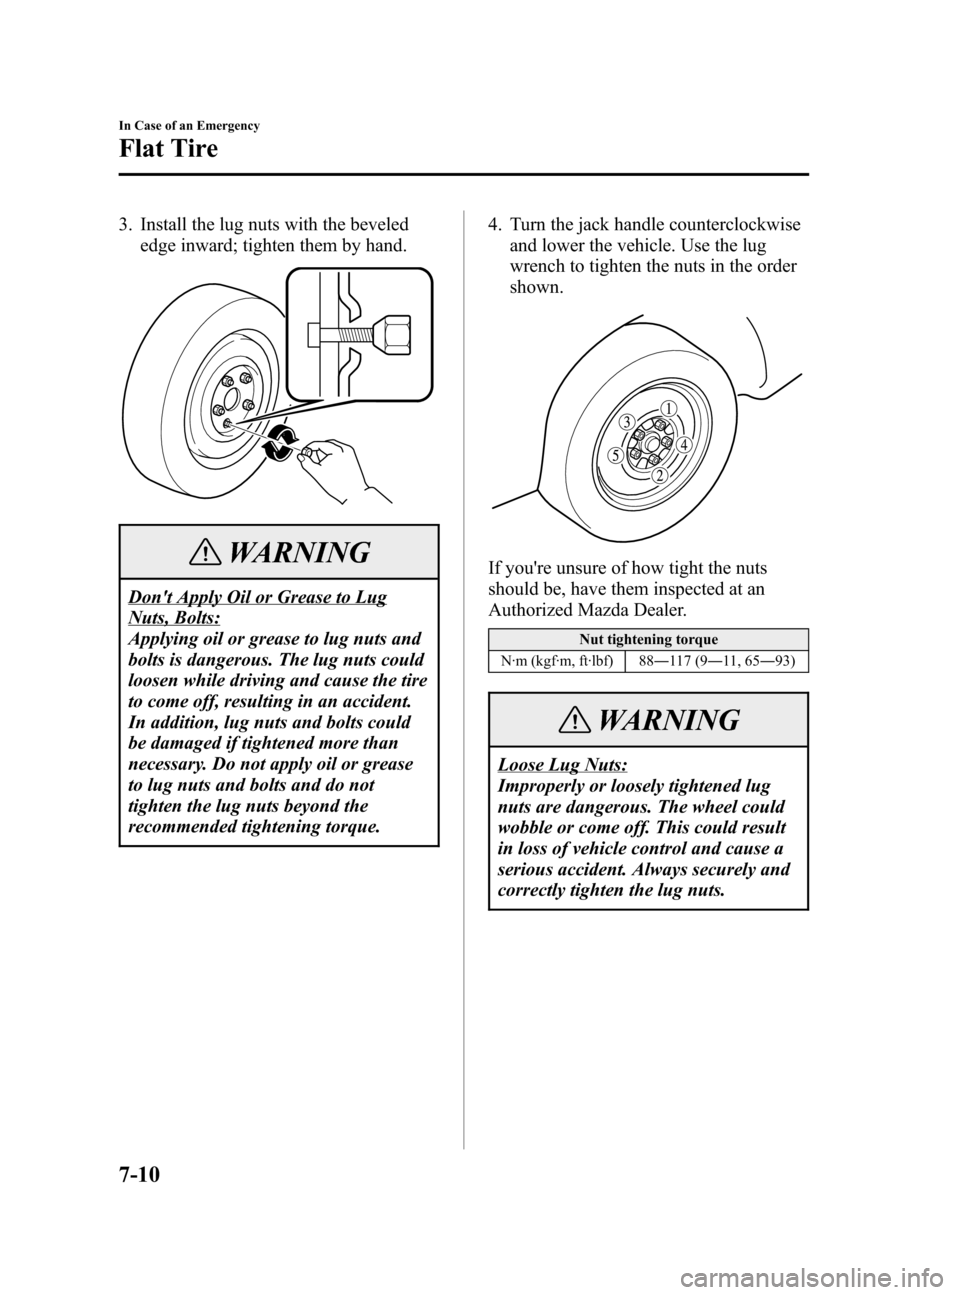 MAZDA MODEL 3 HATCHBACK 2005  Owners Manual (in English) Black plate (218,1)
3. Install the lug nuts with the beveled
edge inward; tighten them by hand.
WARNING
Dont Apply Oil or Grease to Lug
Nuts, Bolts:
Applying oil or grease to lug nuts and
bolts is da